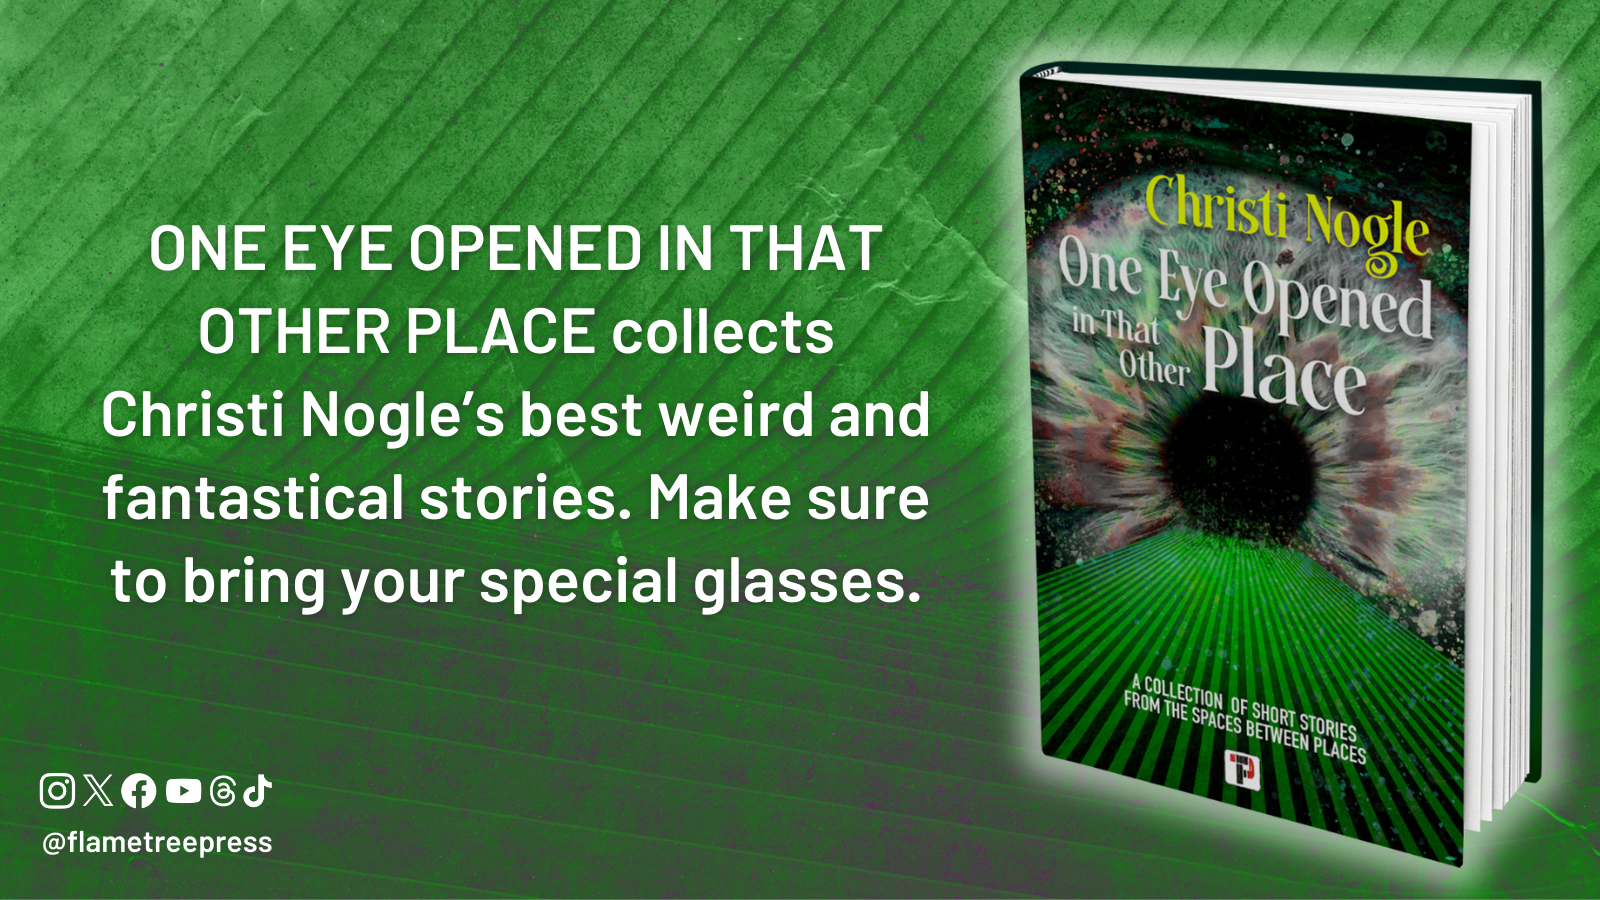 One Eye Opened in That Other Place - Out Now!